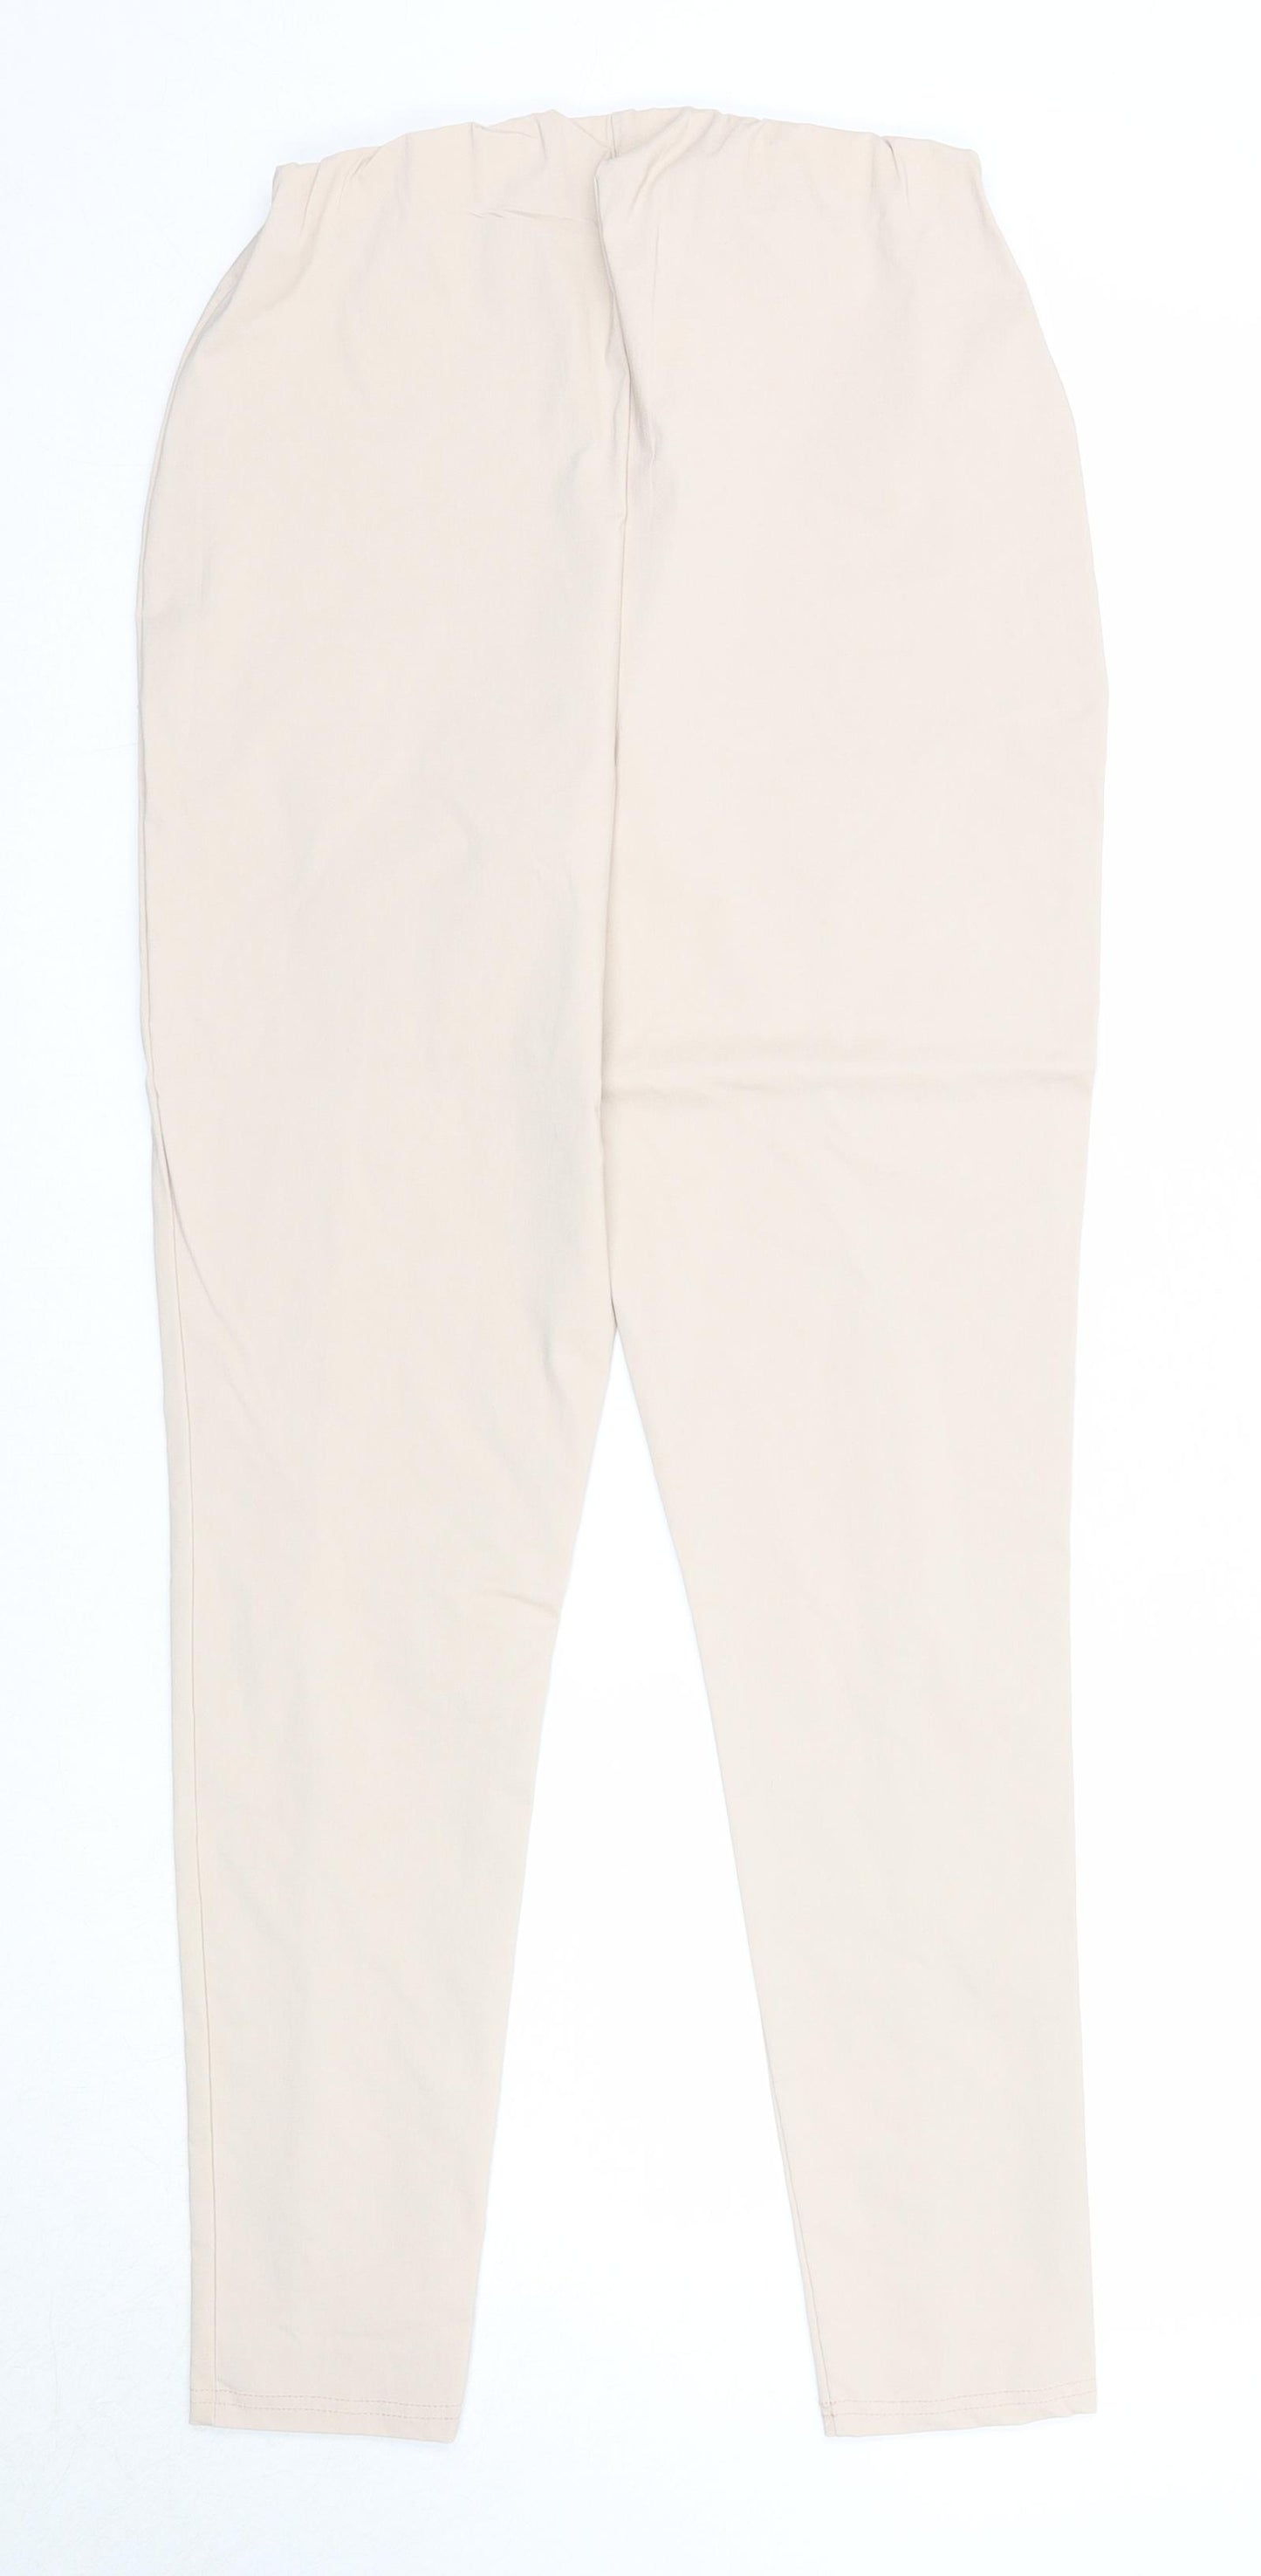 Boohoo Womens Beige Polyester Trousers Size 10 Regular